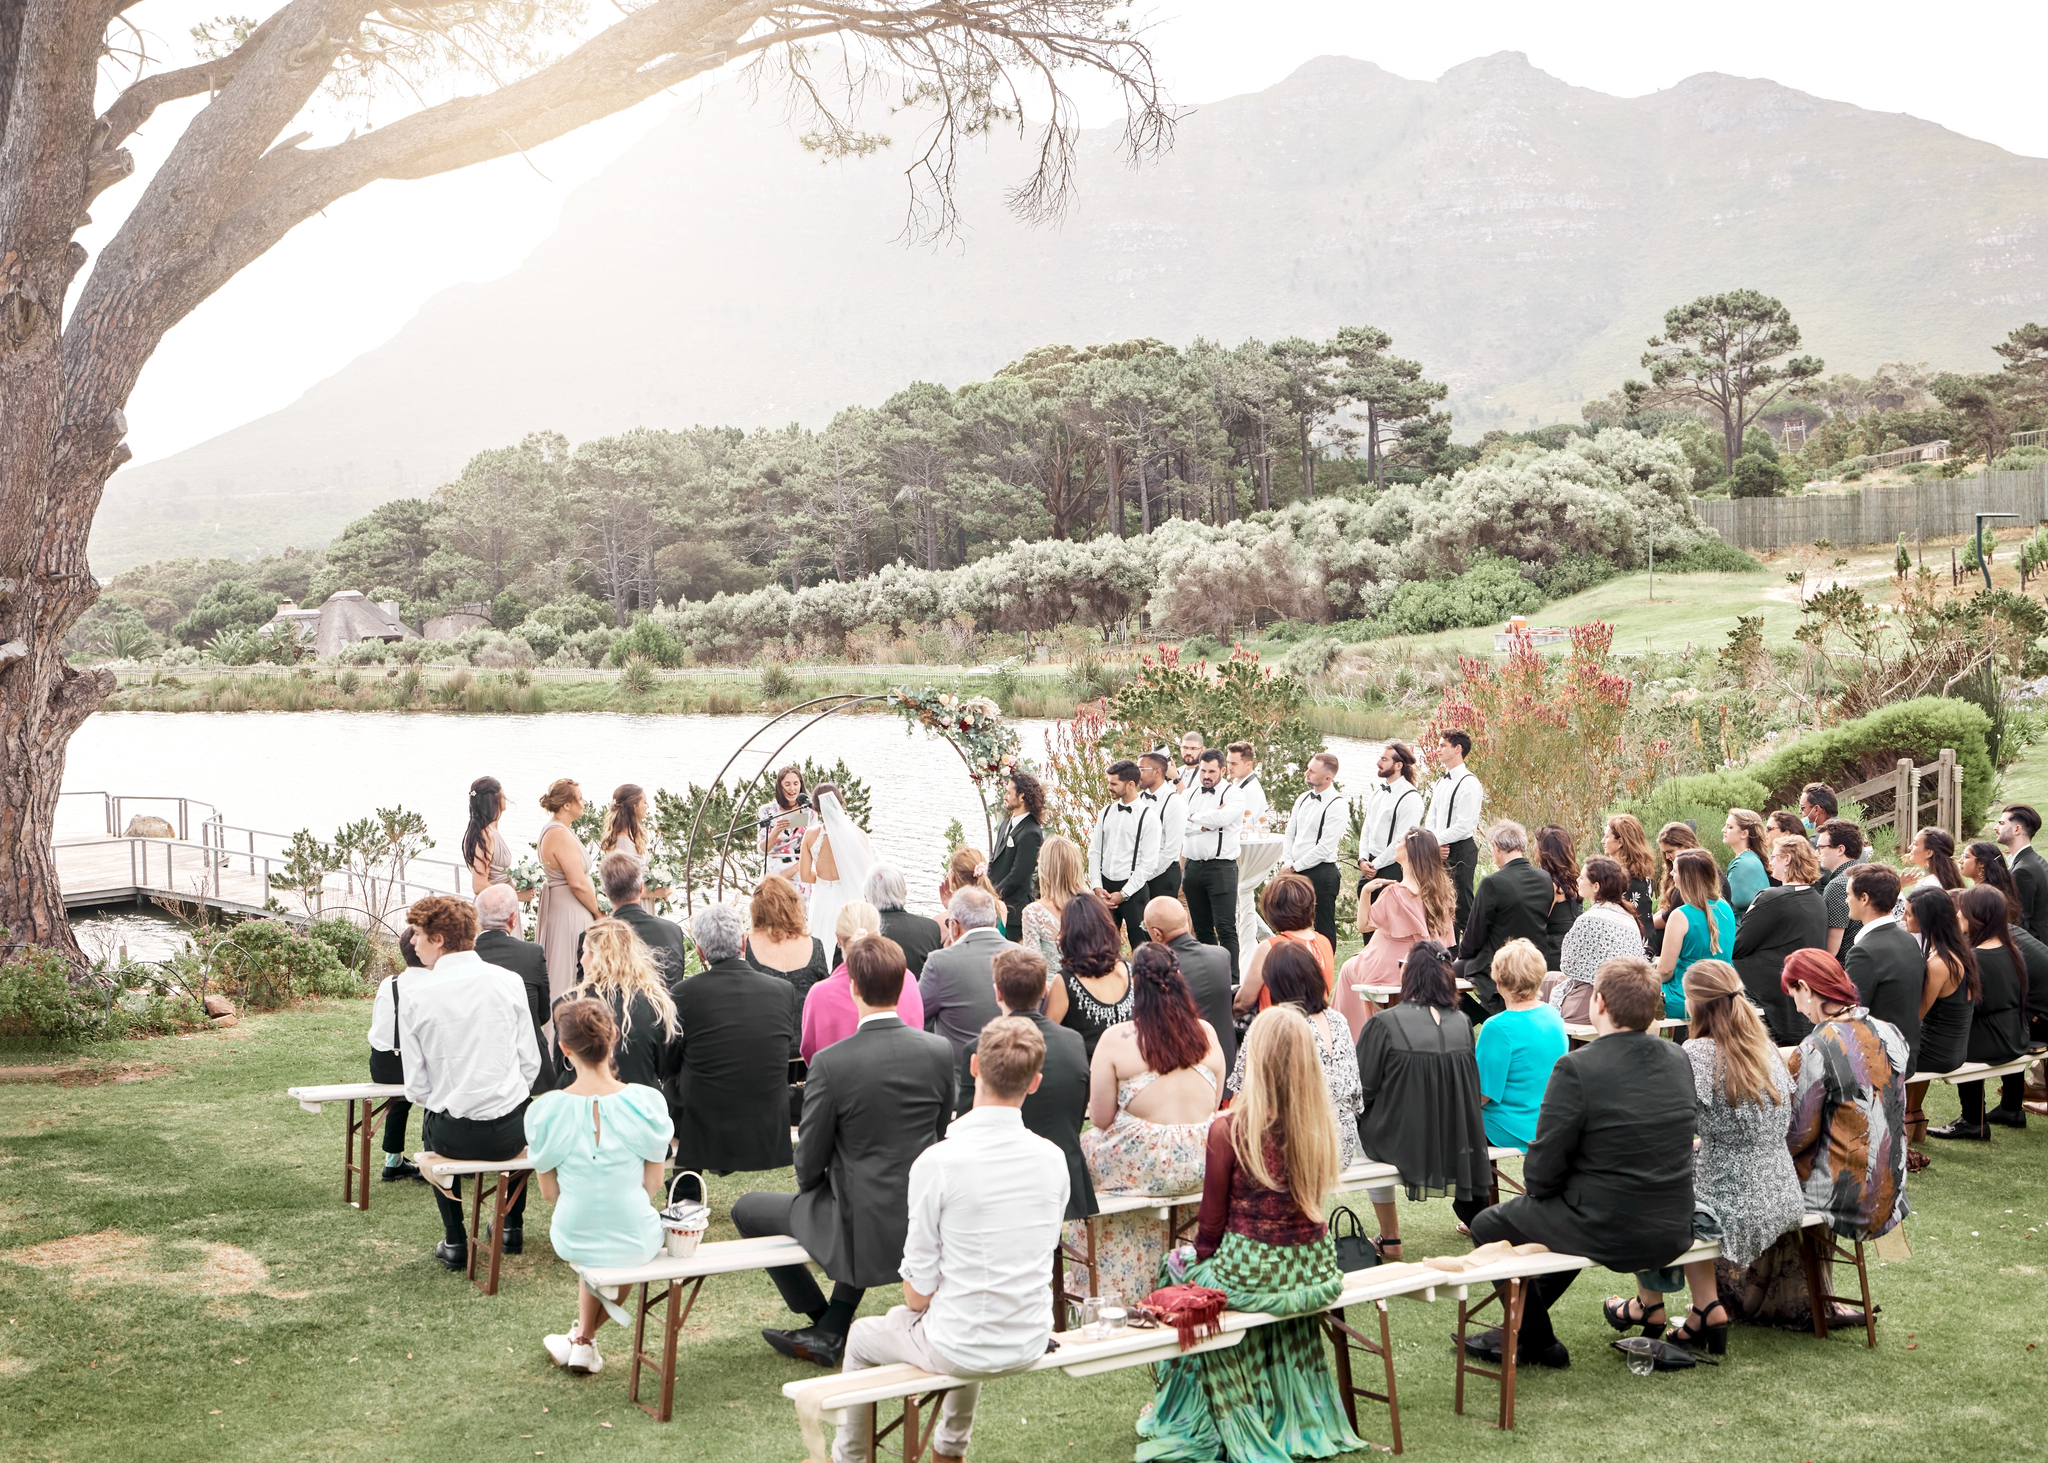 Outdoor wedding ceremony with guests seated and couple at the altar, mountain backdrop